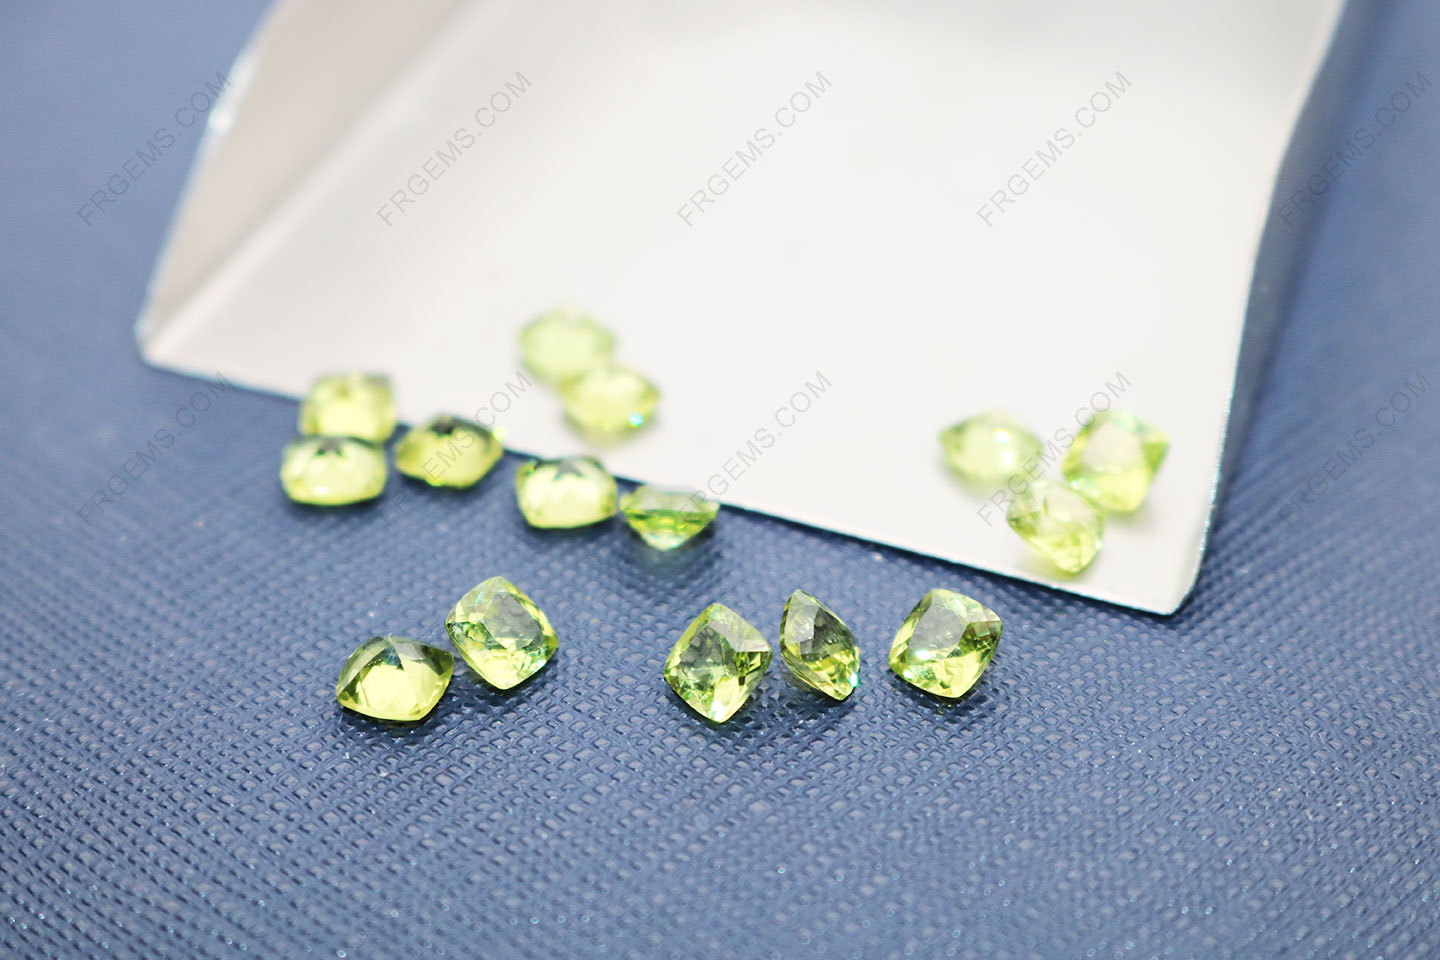 Natural genuine Peridot Color Cushion faceted 5x5mm Gemstones wholesale from China Supplier